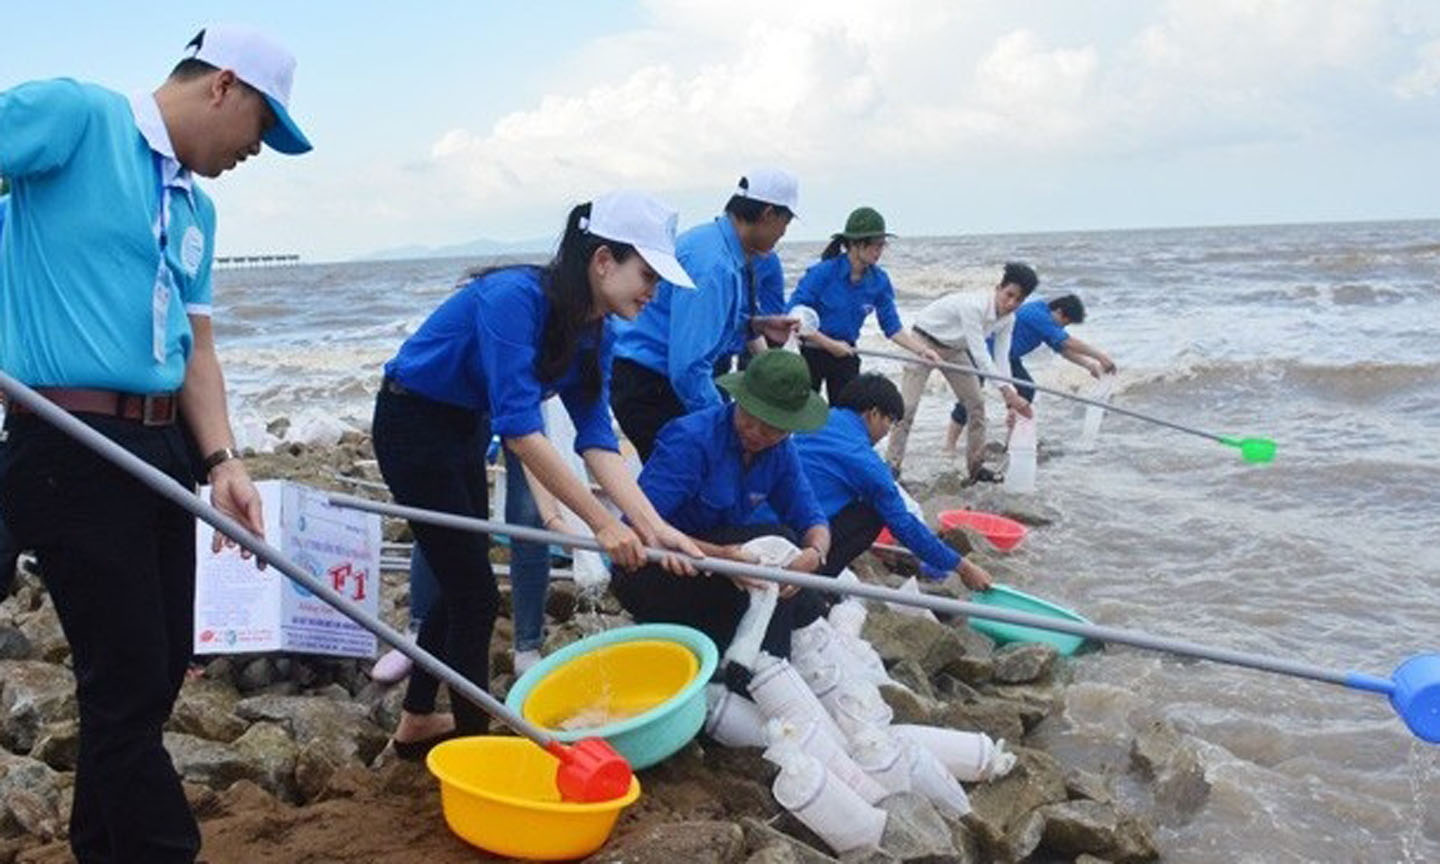 Releasing hatchlings to the sea for regenerating aquatic resources during a ceremony to mark Vietnam Seas and Island Week 2017 in Ca Mau province on June 8, 2017. (Photo: qdnd.vn)